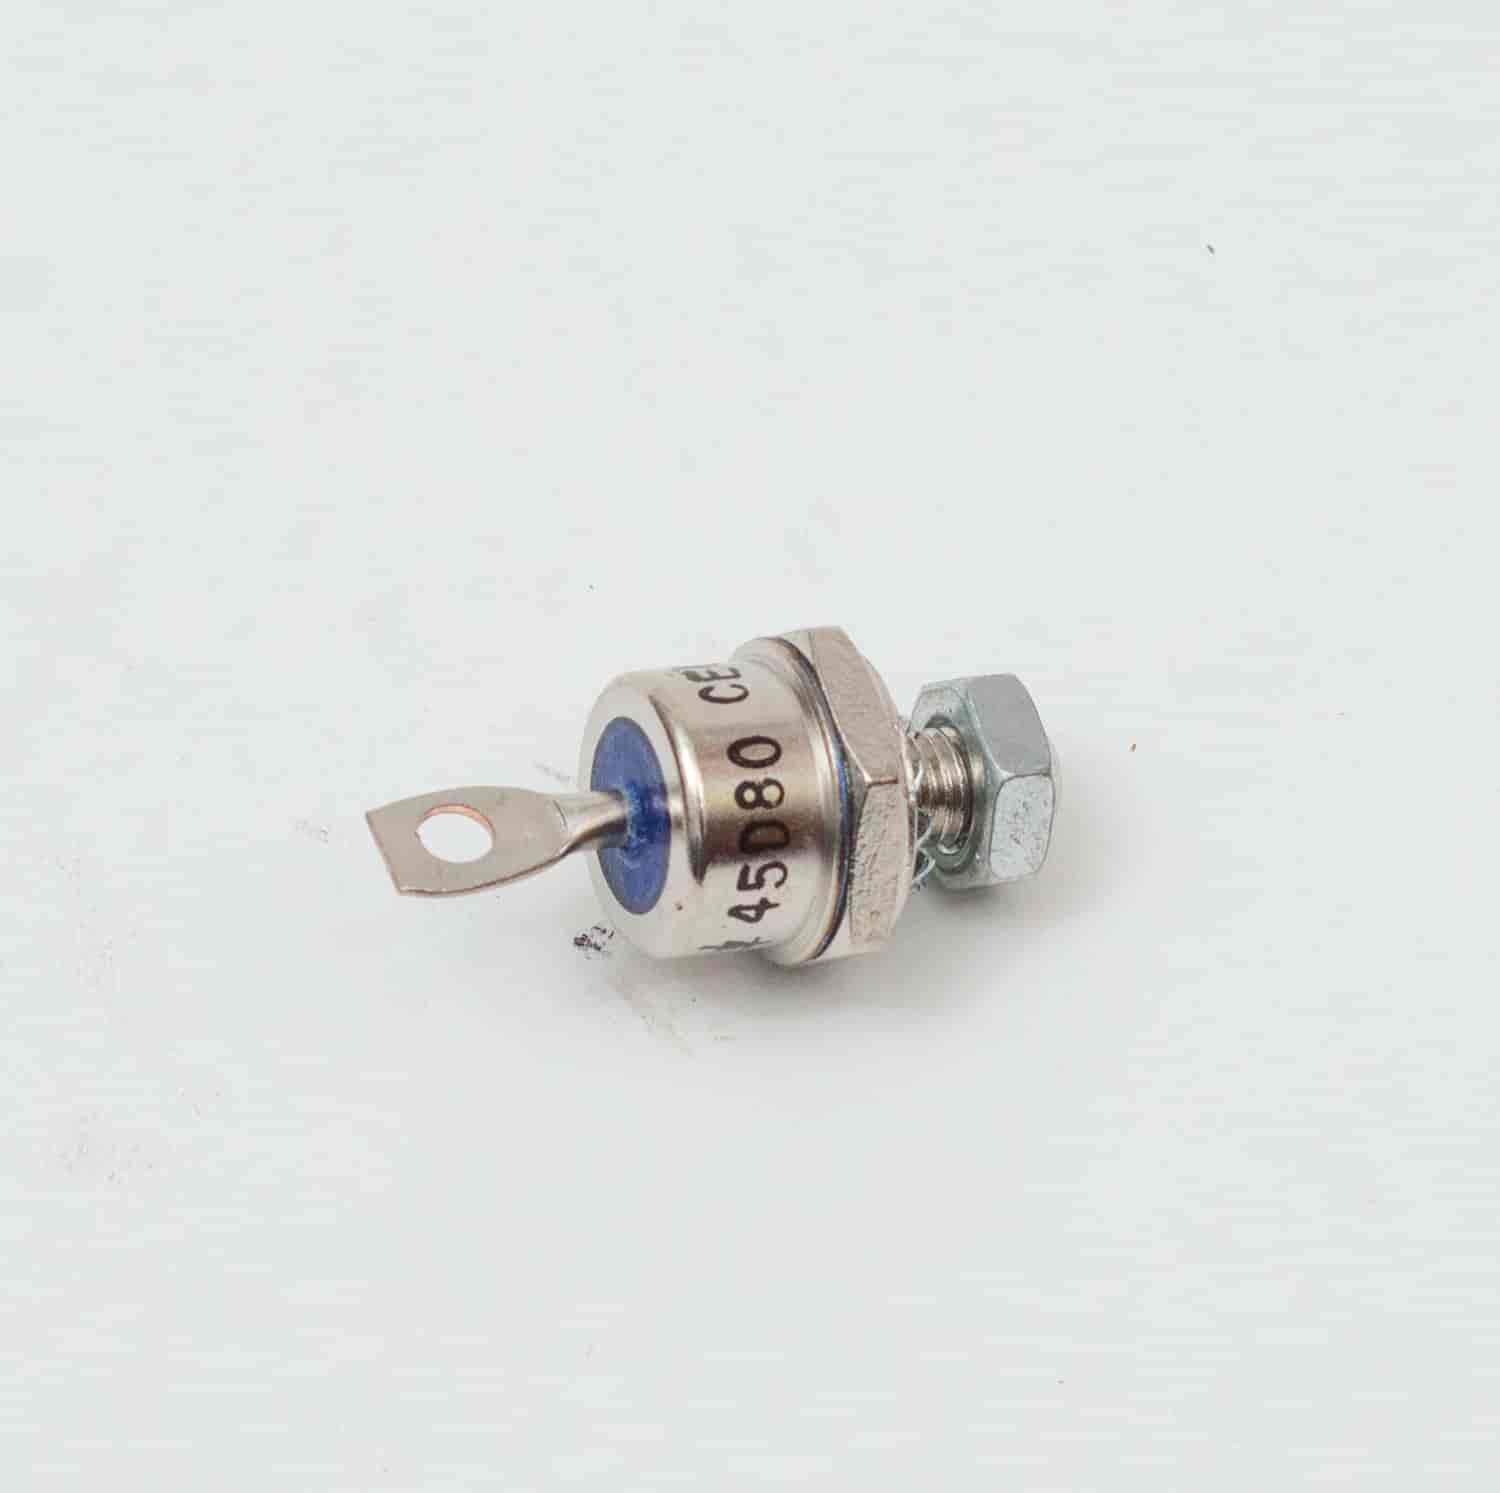 DIODE STUD TYPE #2010